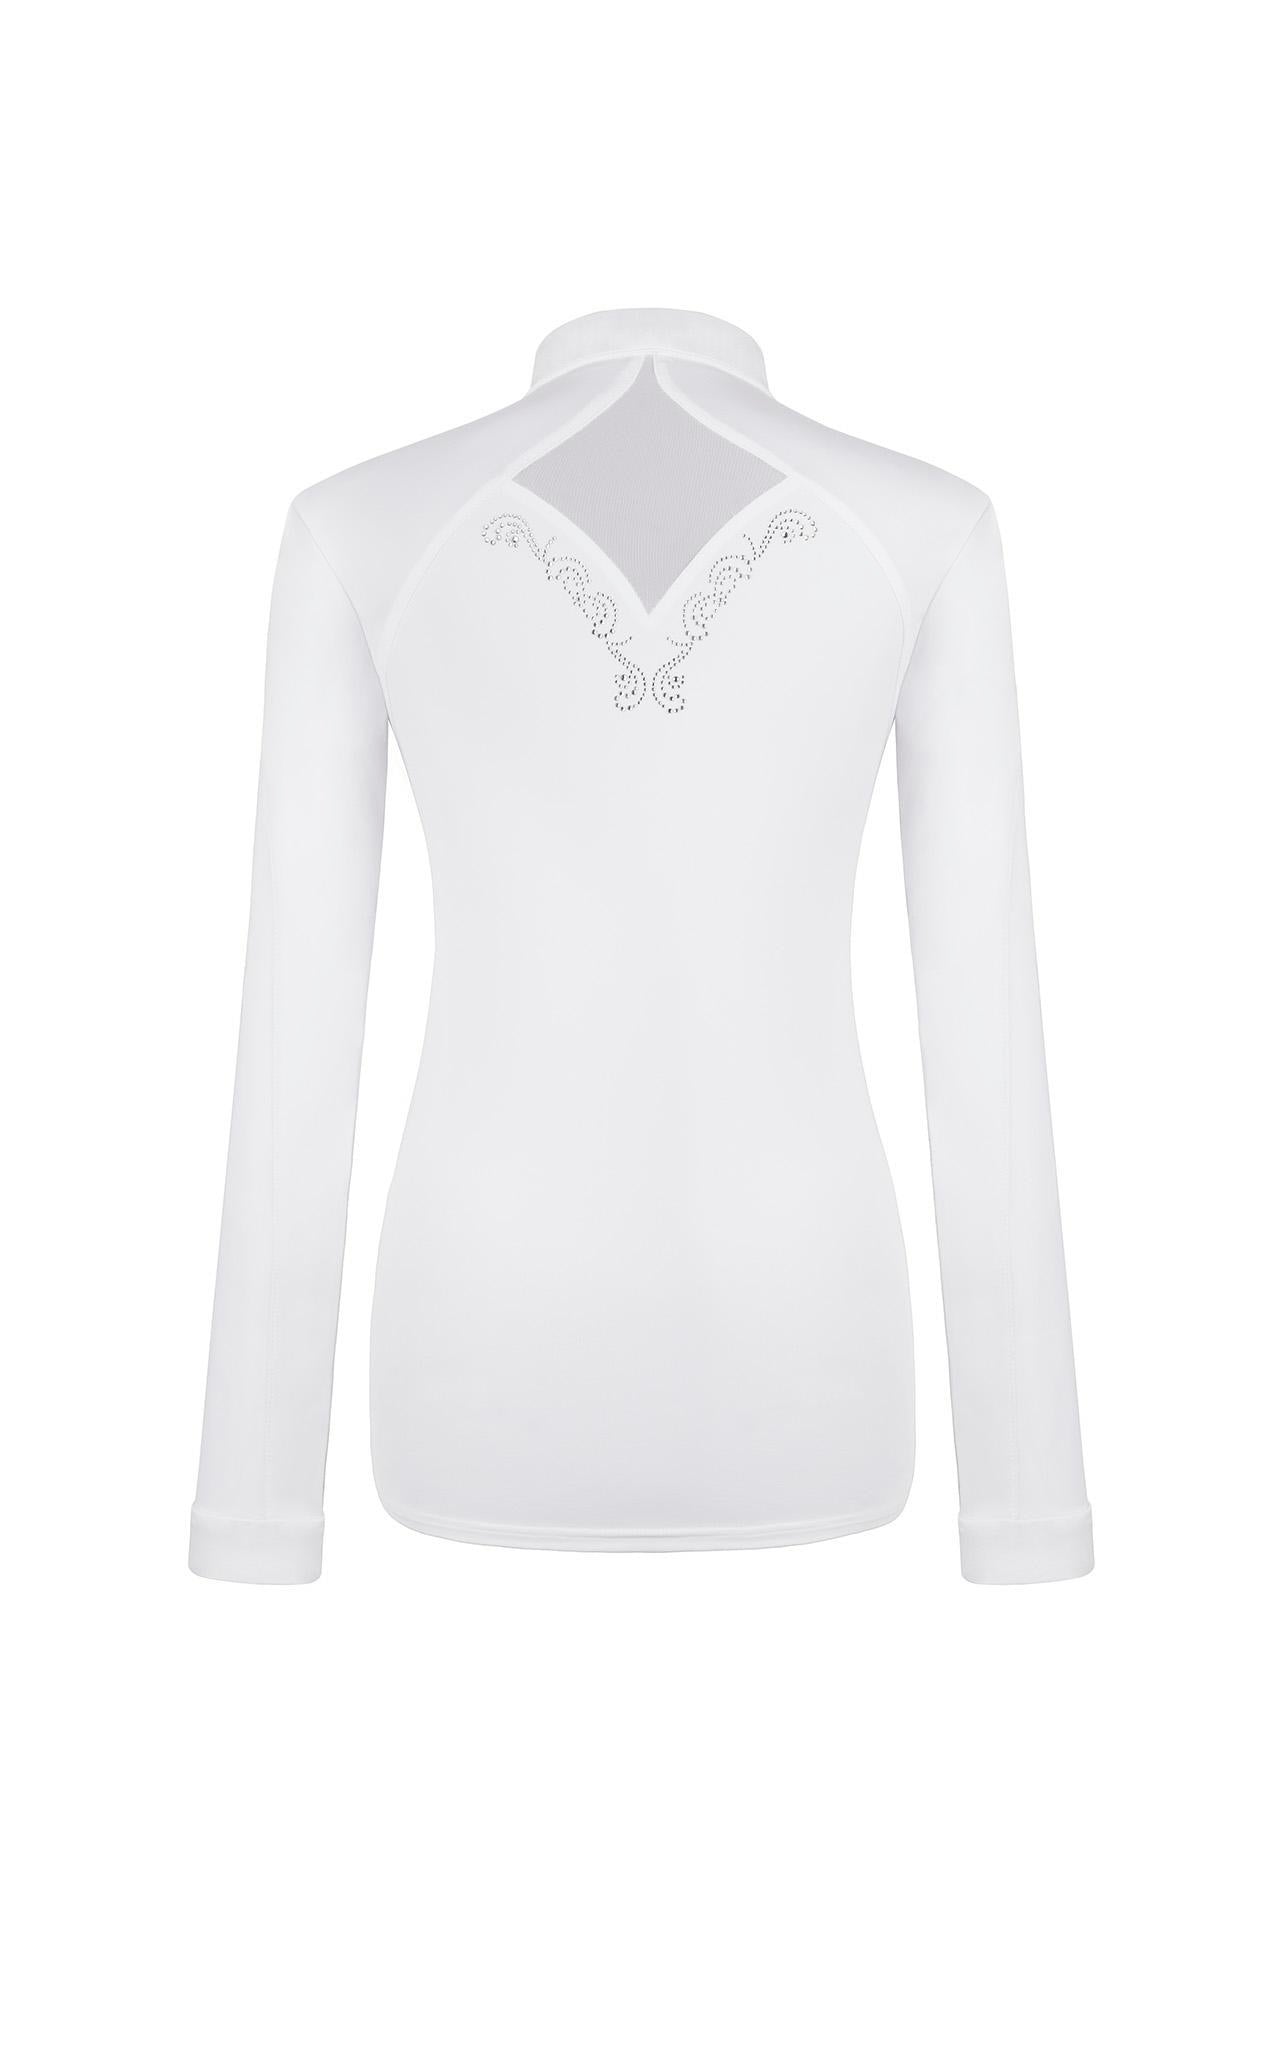 white competition shirt with crystals